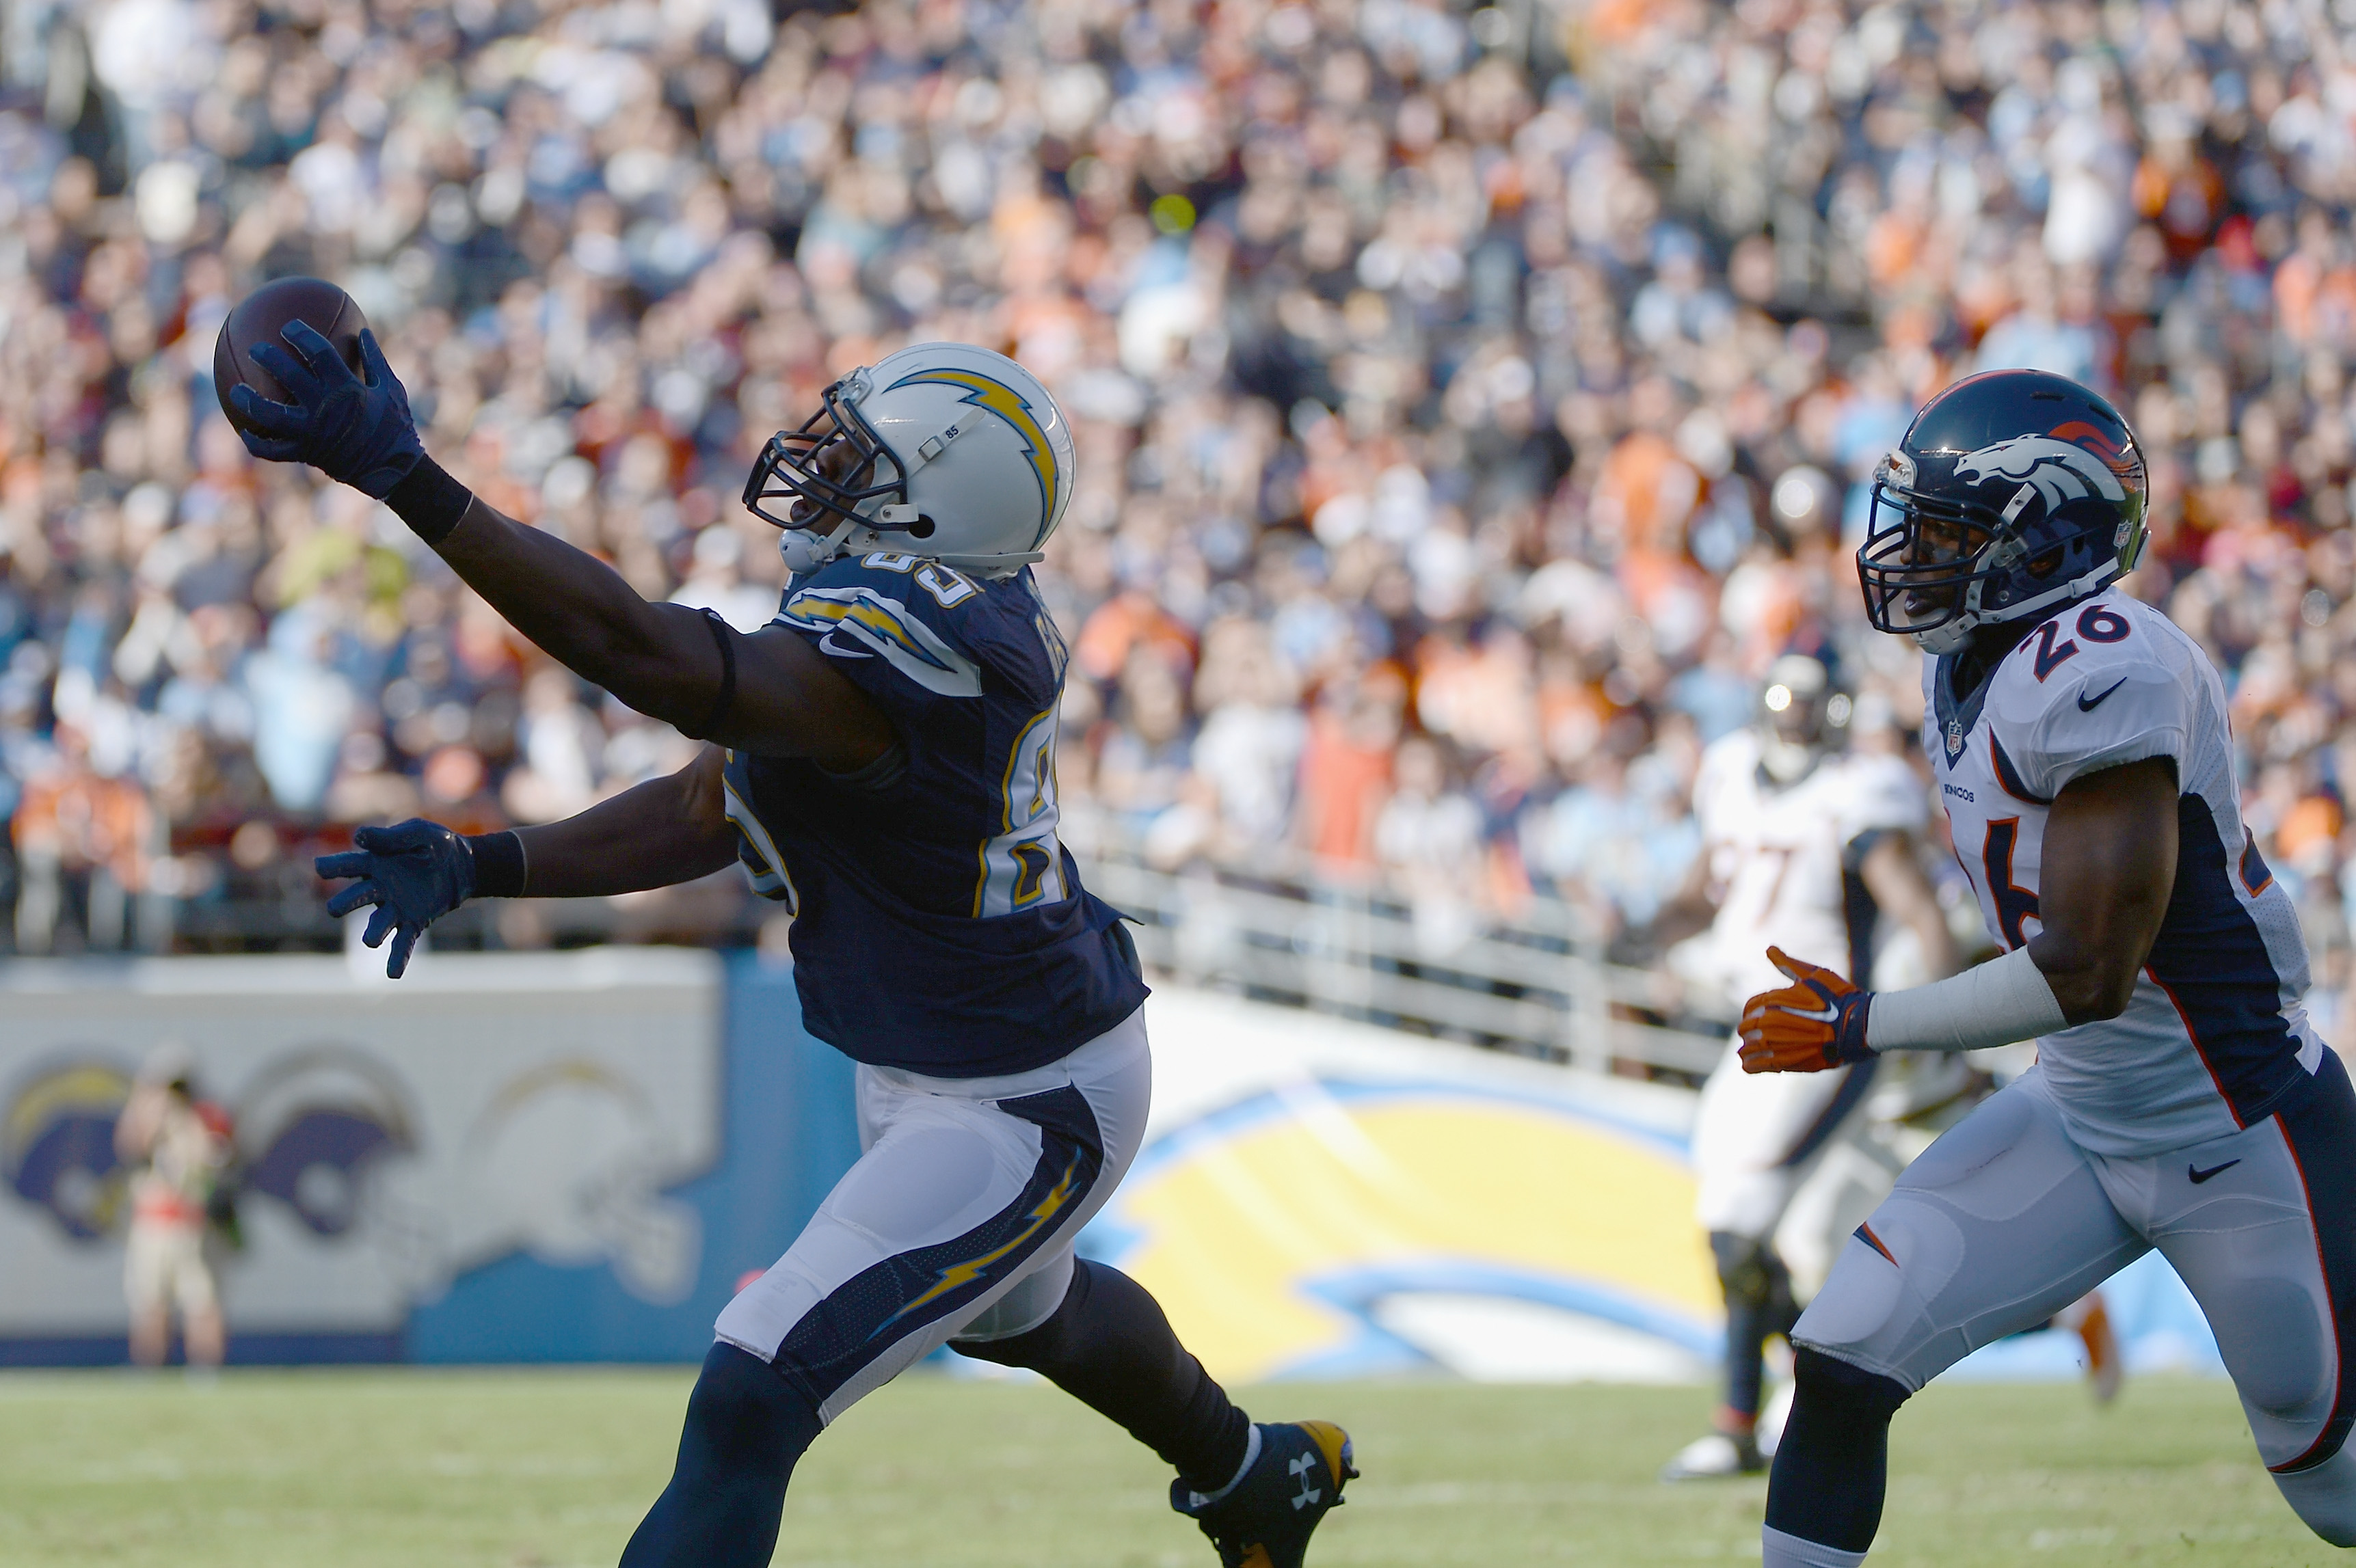 Broncos vs. Chargers Score, Stats & Highlights